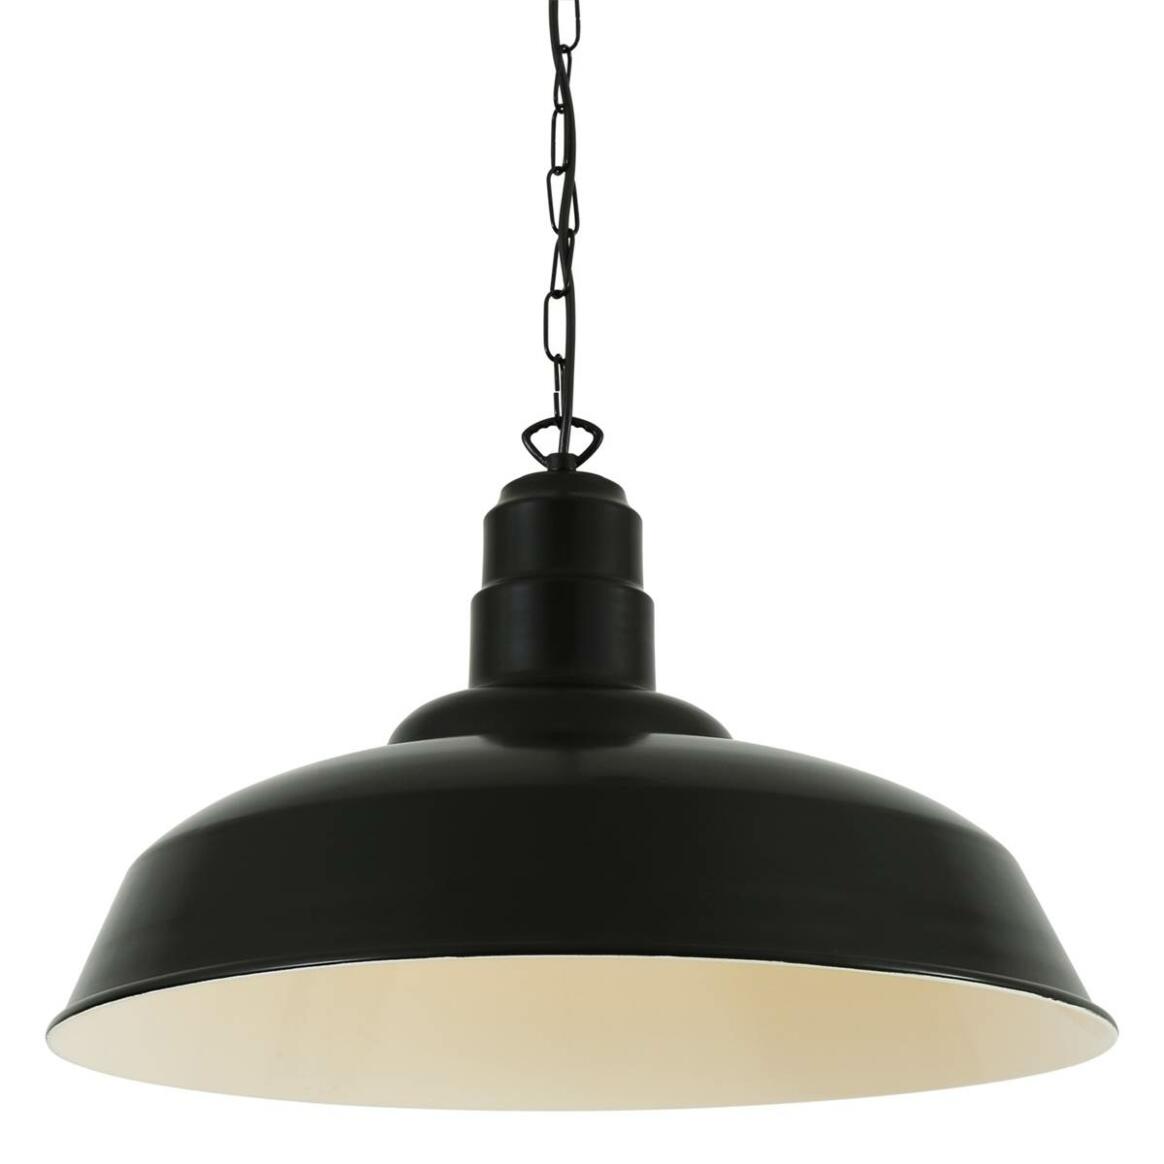 Suspension industrielle Wyse 50cm main product image